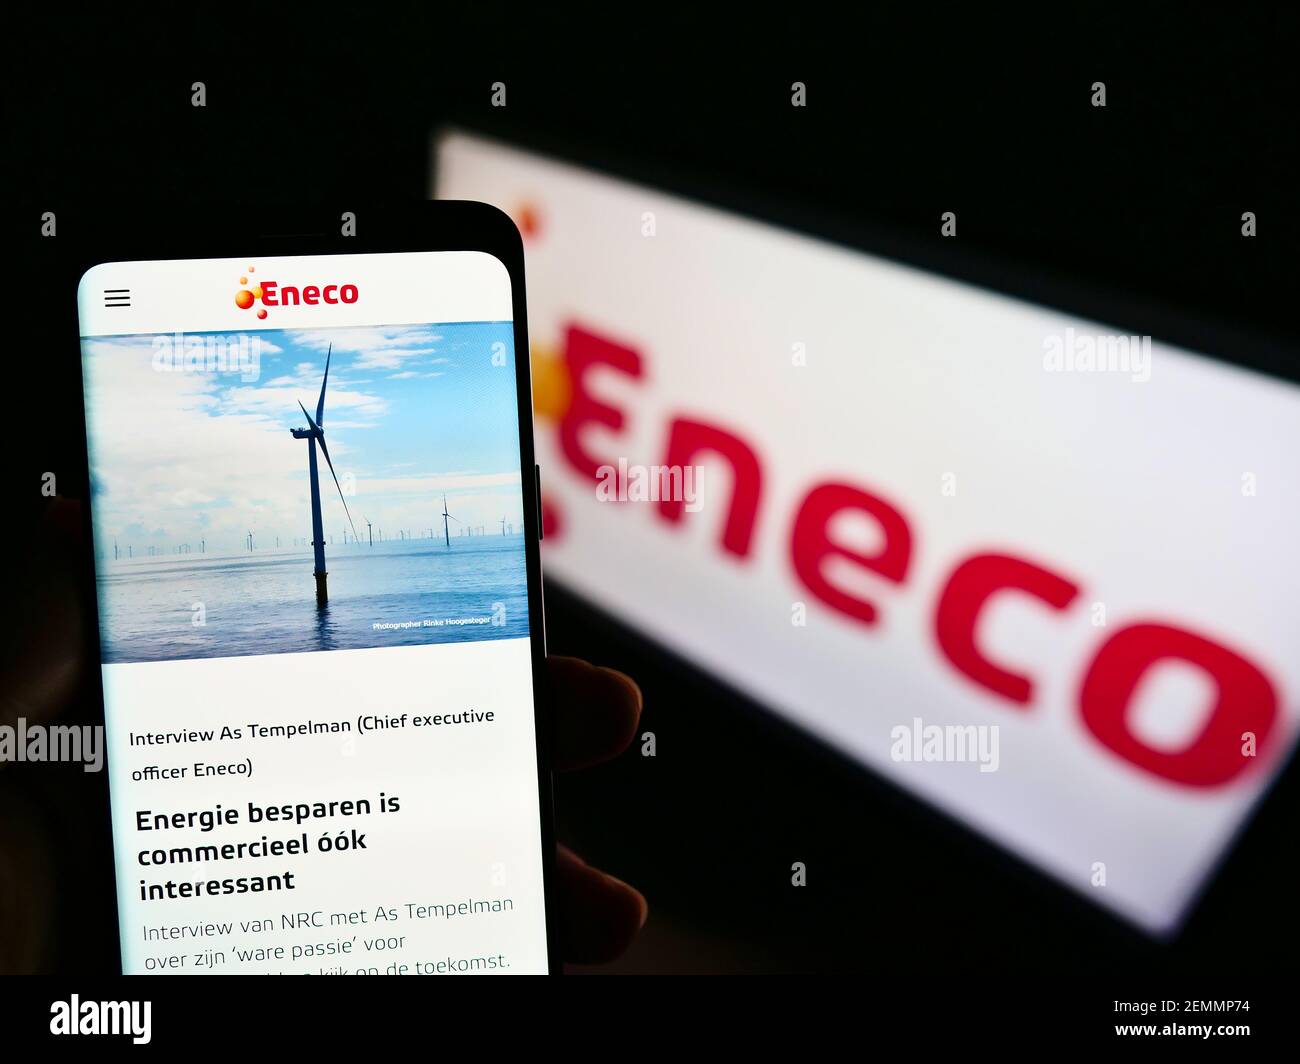 Person holding cellphone with logo of Dutch energy company Eneco Groep N.V. on screen in front of business webpage. Focus on center of phone display. Stock Photo